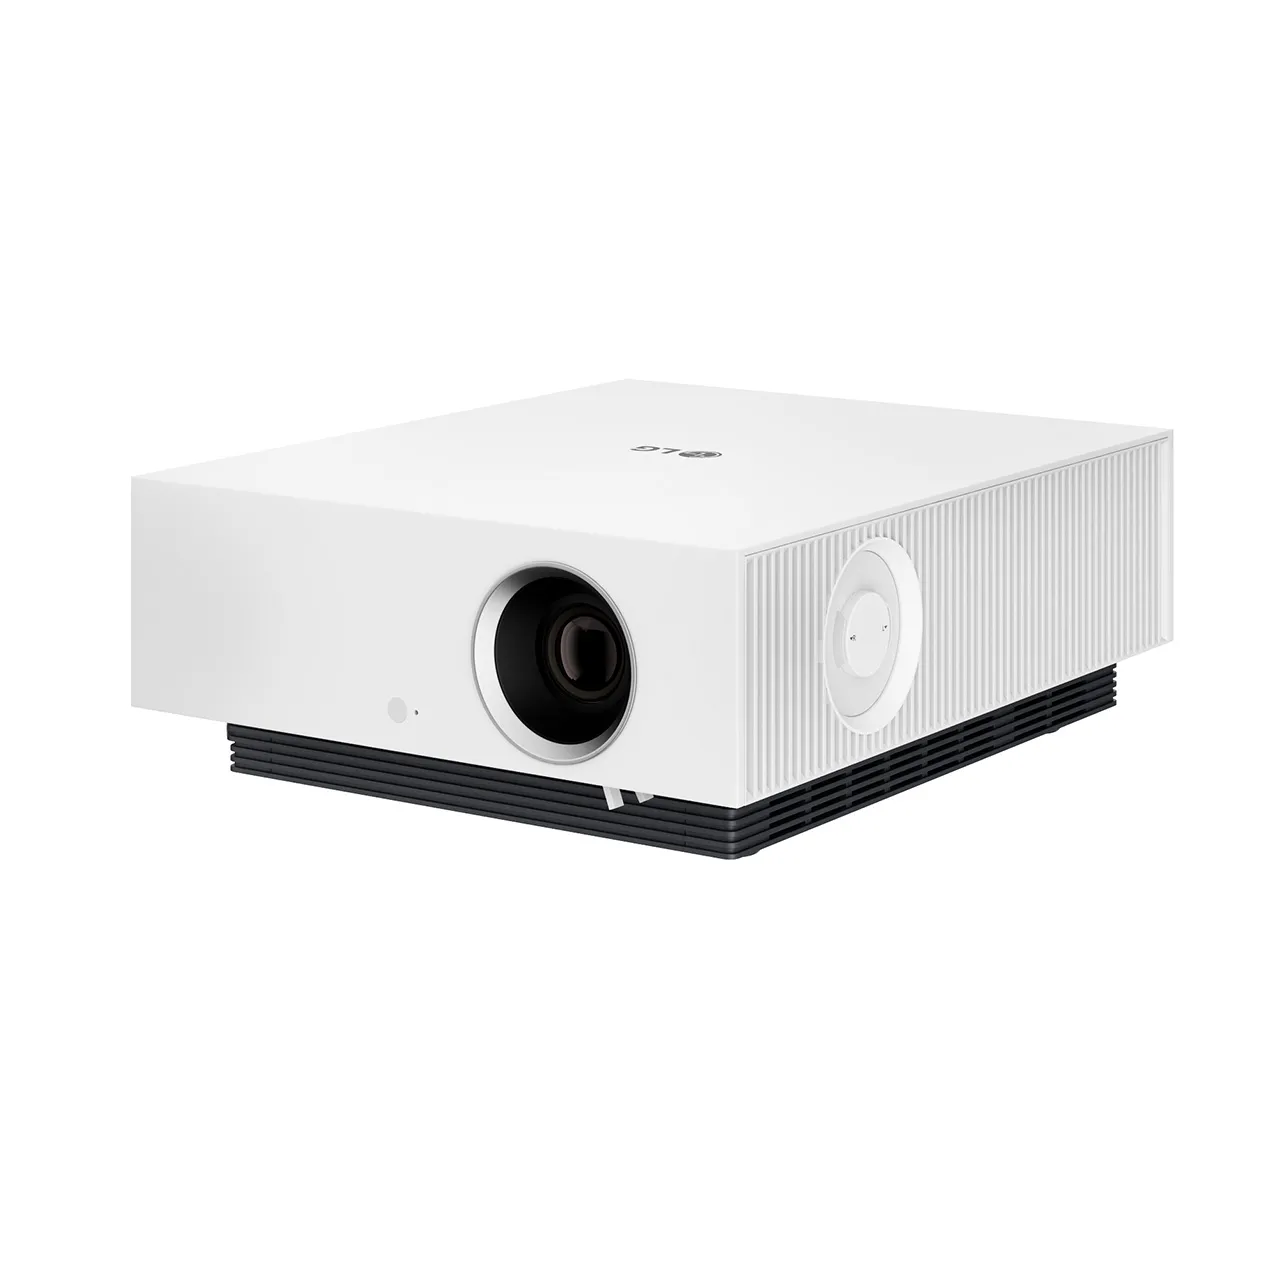 Products – laser-cinebeam-hu810p-video-projector-by-lg